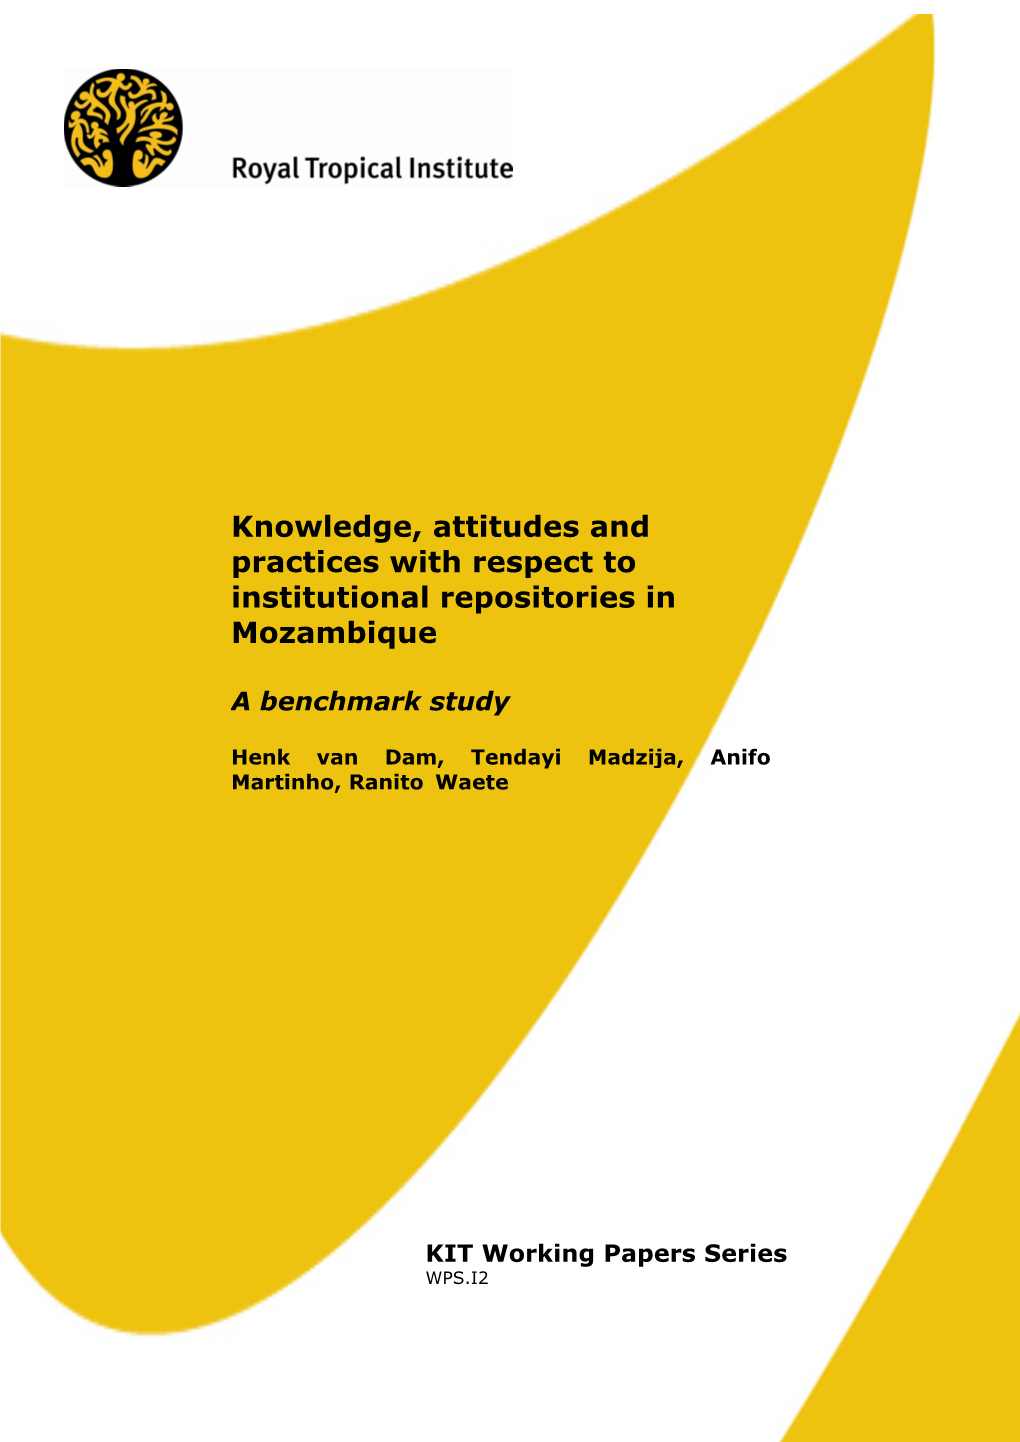 Knowledge, Attitudes and Practices with Respect to Institutional Repositories in Mozambique